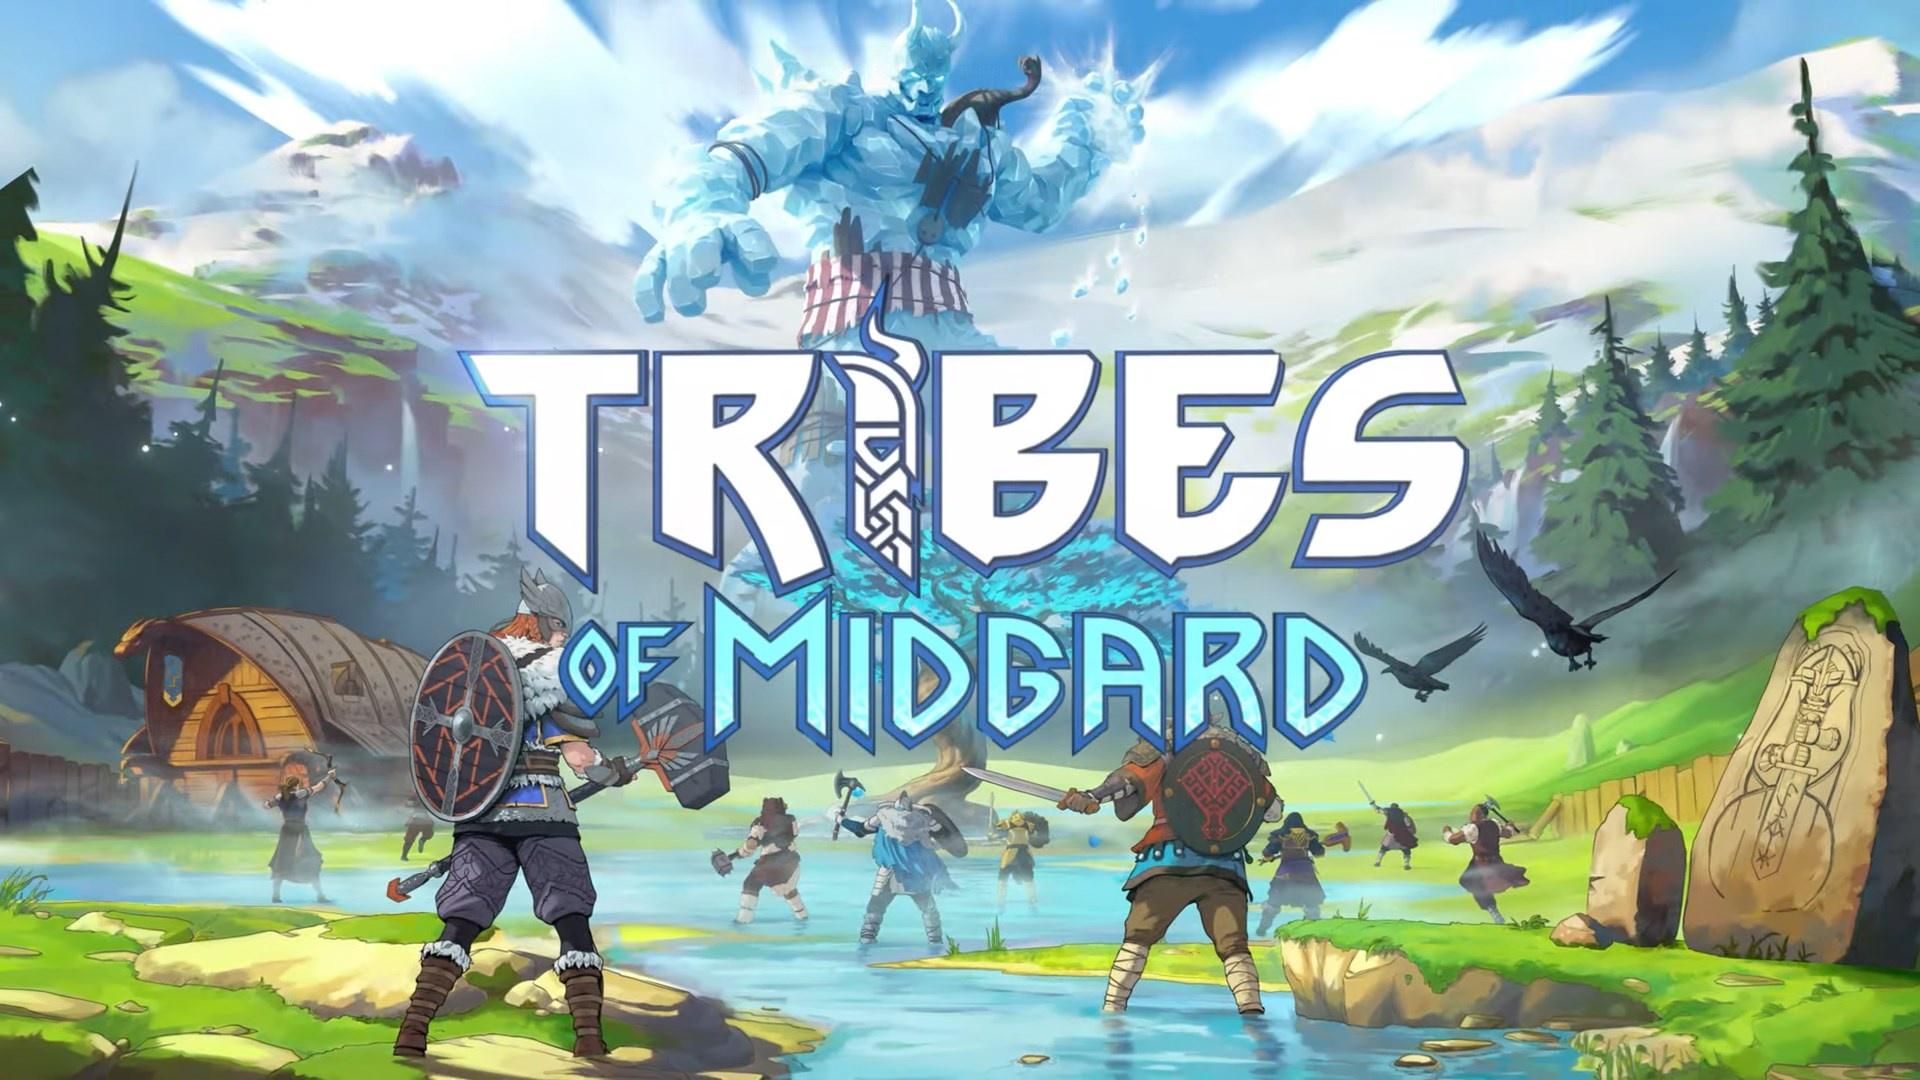 Tribes Of Midgard [PS5/PC] Gameplay Overview 